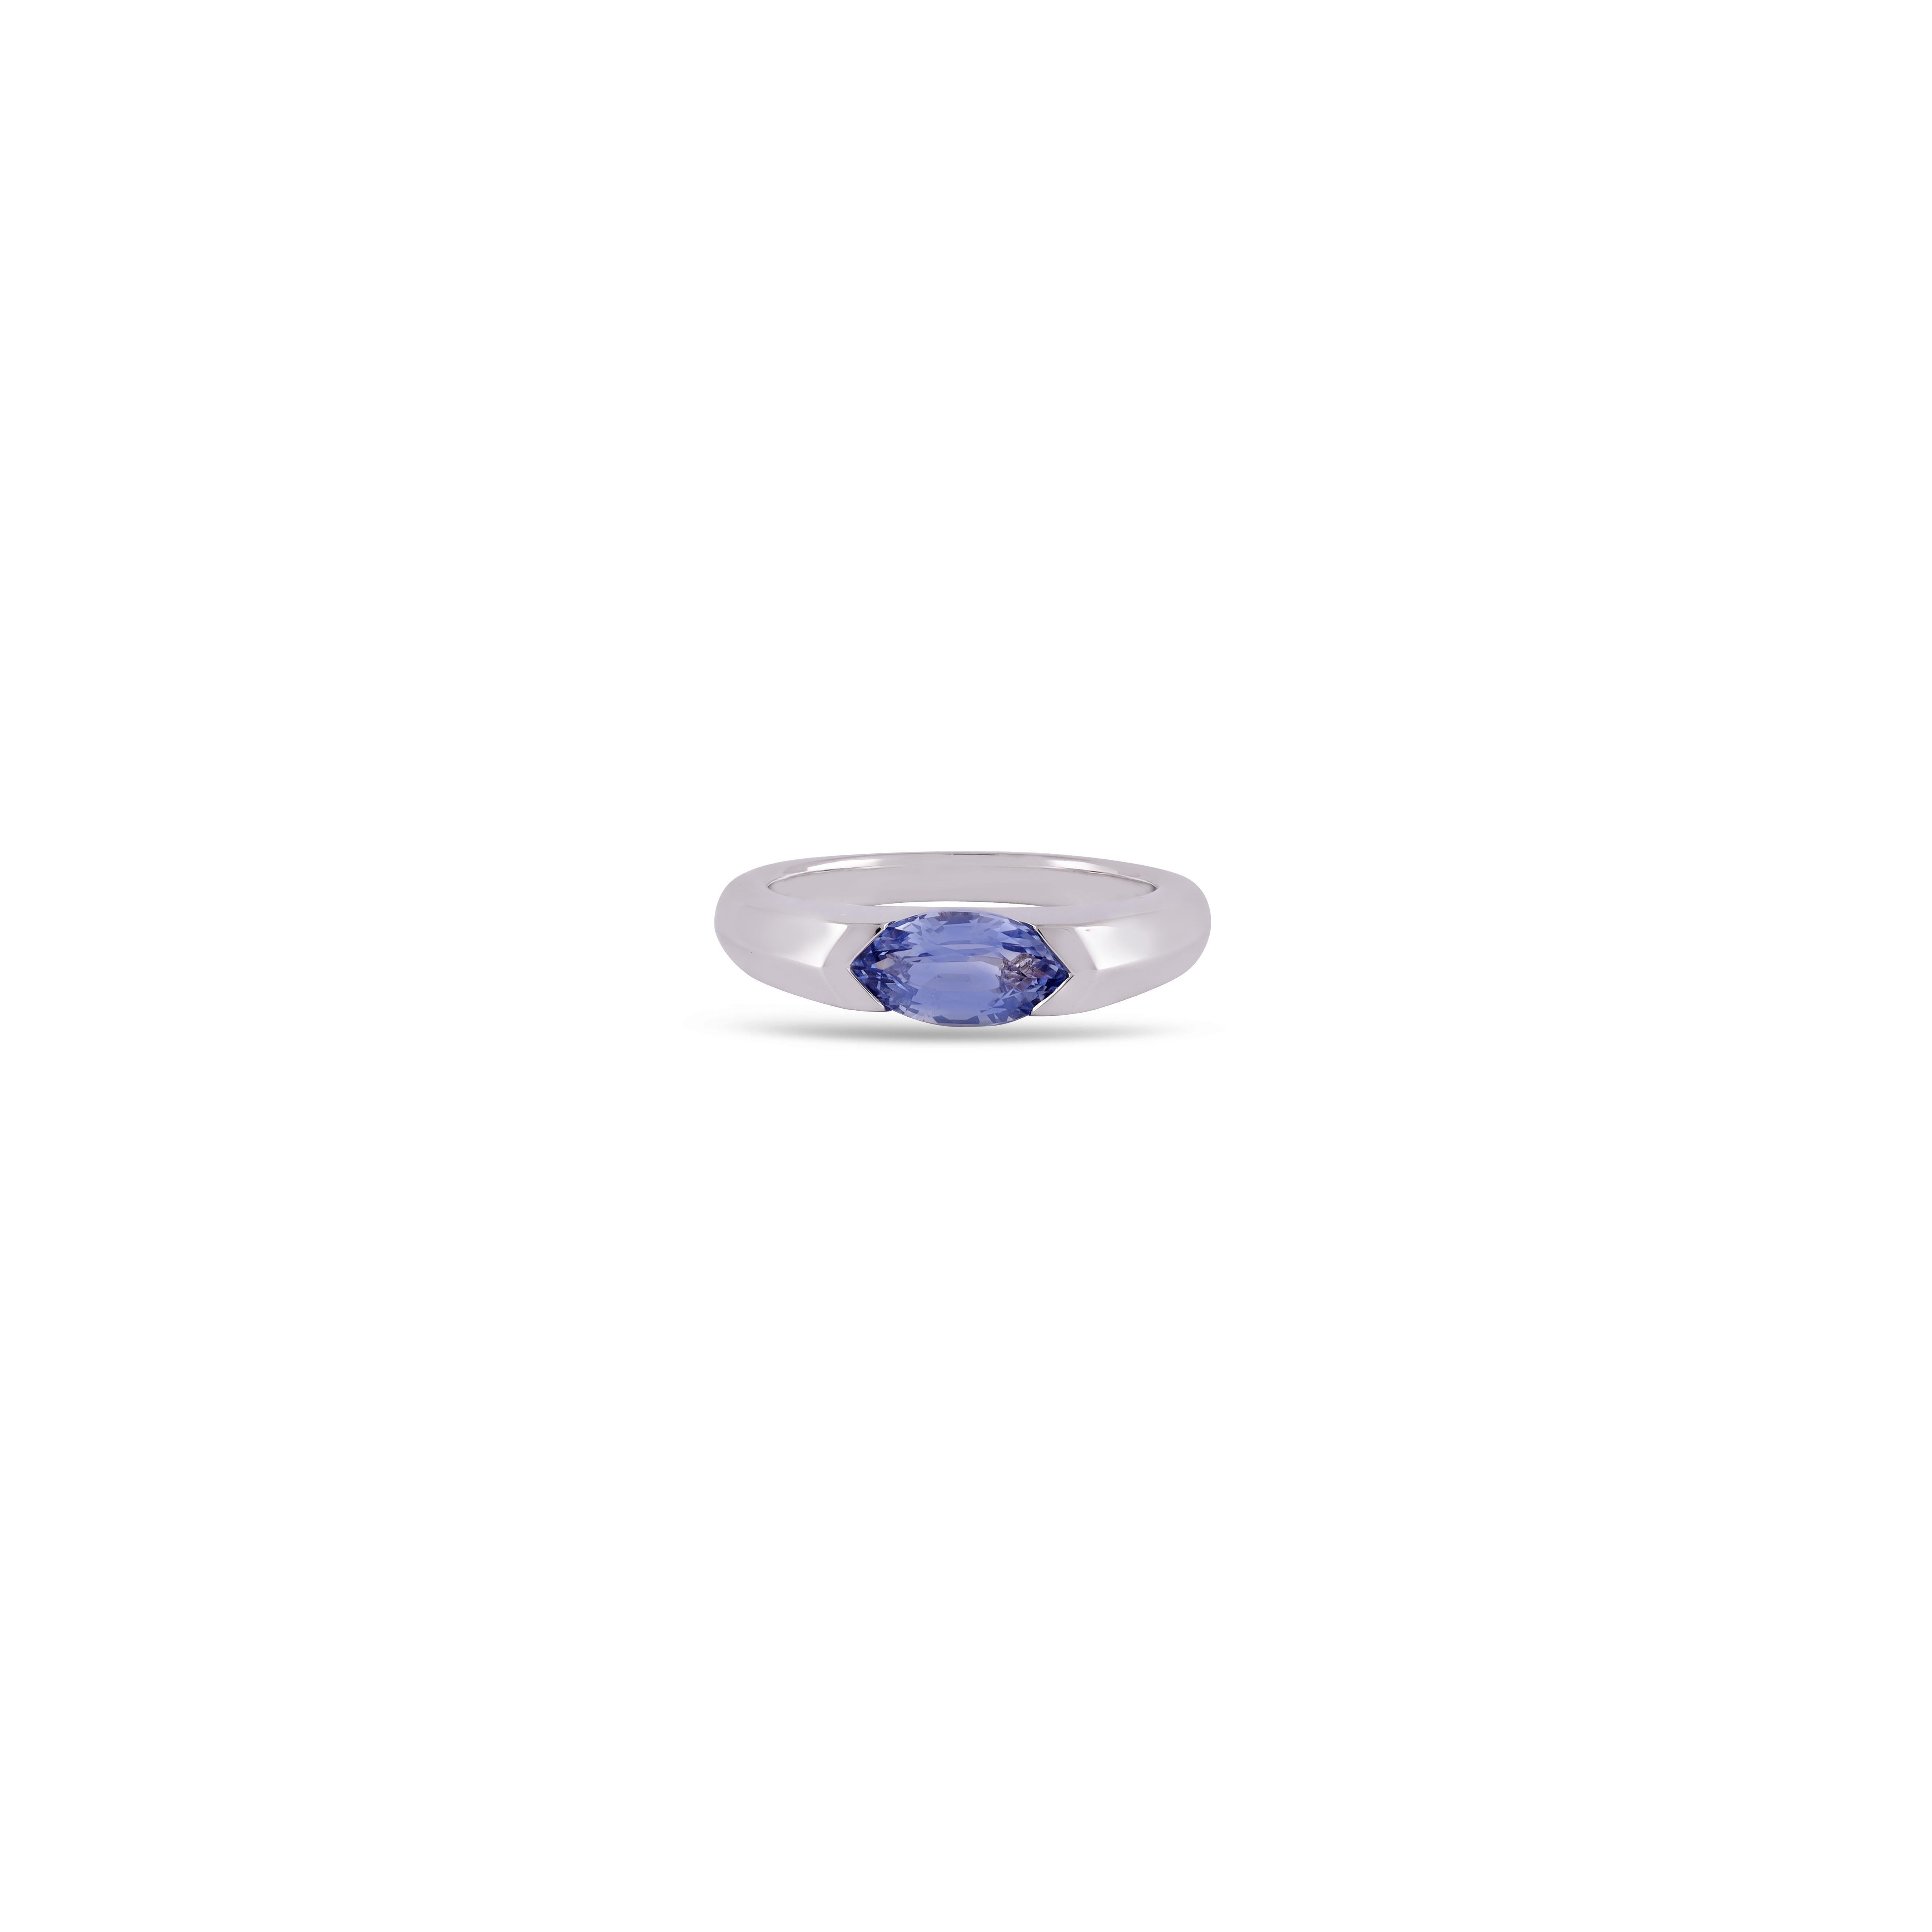 Its an exclusive Clear Blue Sapphire  ring studded in 18k White gold with 1 piece of Sapphire weight 1.41 carat with this entire ring is studded in 18k White gold , ring size can be change as per the requirement, its an exclusive wearable ring.
size